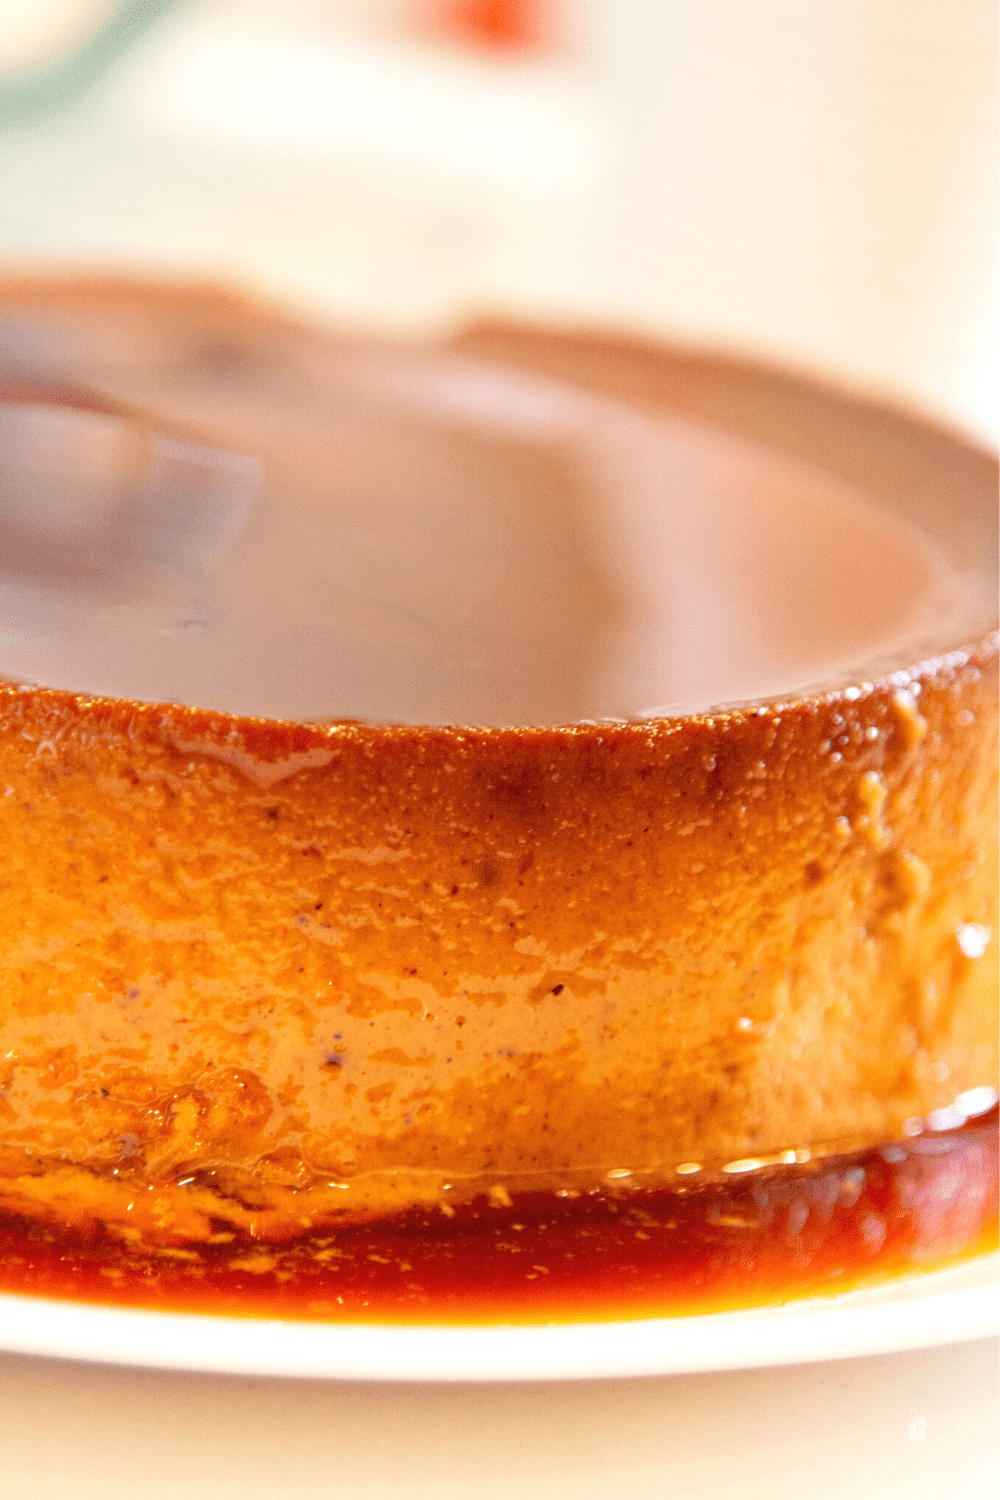 When it comes to fall desserts, pumpkin flan is one of the best! Learn how you can make this dessert using an Instant Pot. #InstantPot #Flan #Pumpkin via @mystayathome